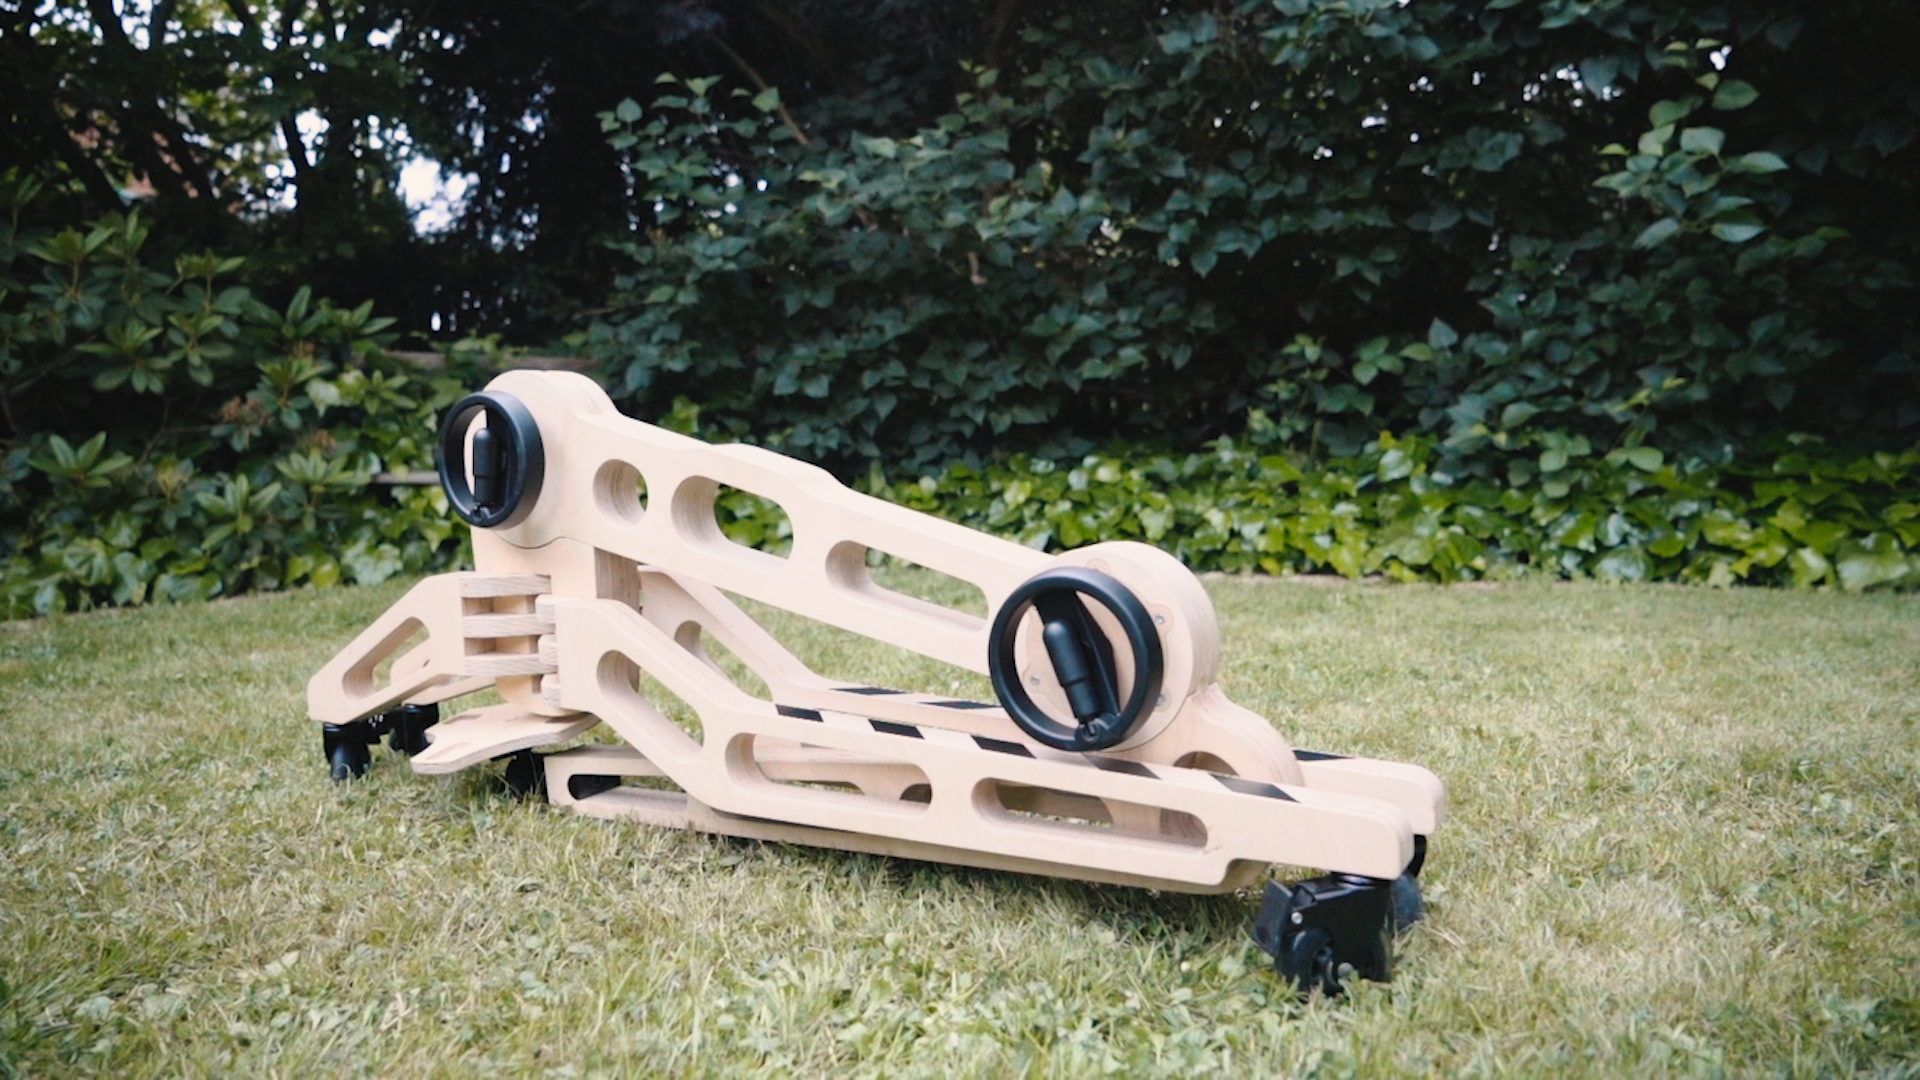 The freasel is outside on some grass in it's folded state. It's a skeletal form made of light coloured plywood. Two circular black adjustment handles are facing the camera.